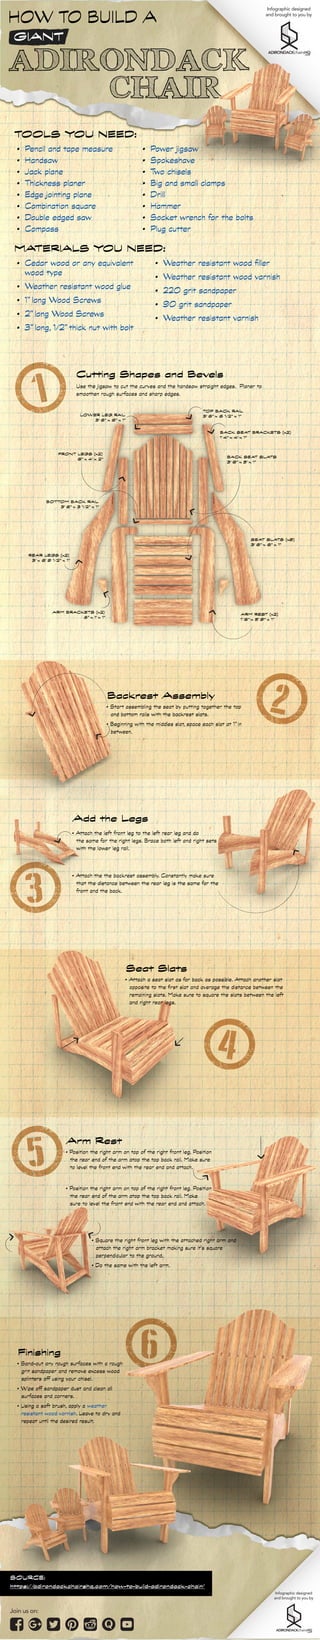 HOW TO BUILD A
ADIRONDACK
CHAIR
Infographic designed
and brought to you by
Infographic designed
and brought to you by
Join us on:
GIANT
6
SOURCE:
https://
adirondackchairshq.com/how-to-build-adirondack-chair/
TOOLS YOU NEED:
• Pencil and tape measure
• Handsaw
• Jack plane
• Thickness planer
• Edge jointing plane
• Combination square
• Double edged saw
• Compass
• Power jigsaw
• Spokeshave
• Two chisels
• Big and small clamps
• Drill
• Hammer
• Socket wrench for the bolts
• Plug cutter
1
2
3
Cutting Shapes and Bevels
TOP BACK RAIL
3’ 6” x 6 1/2” x 1”
BOTTOM BACK RAIL
3’ 6” x 3 1/2” x 1”
ARM BRACKETS (x2)
8” x 1’ x 1”
ARM REST (x2)
1’ 6” x 5’ 9” x 1”
LOWER LEG RAIL
3’ 6” x 6” x 1”
SEAT SLATS (x9)
3’ 6” x 6’’ x 1”
BACK SEAT SLATS
3’ 6” x 5’ x 1”
REAR LEGS (x2)
3’ x 6’ 9 1/2’’ x 1”
FRONT LEGS (x2)
6” x 4’ x 2”
BACK SEAT BRACKETS (x2)
1’ 4” x 4’ x 1”
Use the jigsaw to cut the curves and the handsaw straight edges. Planer to
smoothen rough surfaces and sharp edges.
Backrest Assembly
• Start assembling the seat by putting together the top
and bottom rails with the backrest slats.
• Beginning with the middles slat, space each slat at 1” in
between.
Add the Legs
• Attach the left front leg to the left rear leg and do
the same for the right legs. Brace both left and right sets
with the lower leg rail.
• Attach the the backrest assembly. Constantly make sure
that the distance between the rear leg is the same for the
front and the back.
4
Seat Slats
• Attach a seat slat as far back as possible. Attach another slat
opposite to the first slat and average the distance between the
remaining slats. Make sure to square the slats between the left
and right rear legs.
5
Arm Rest
• Position the right arm on top of the right front leg. Position
the rear end of the arm atop the top back rail. Make sure
to level the front end with the rear end and attach.
• Position the right arm on top of the right front leg. Position
the rear end of the arm atop the top back rail. Make
sure to level the front end with the rear end and attach.
• Square the right front leg with the attached right arm and
attach the right arm bracket making sure it’s square
perpendicular to the ground.
• Do the same with the left arm.
Finishing
• Sand-out any rough surfaces with a rough
grit sandpaper and remove excess wood
splinters off using your chisel.
• Wipe off sandpaper dust and clean all
surfaces and corners.
• Using a soft brush, apply a weather
resistant wood varnish. Leave to dry and
repeat until the desired result.
MATERIALS YOU NEED:
• Cedar wood or any equivalent
wood type
• Weather resistant wood glue
• 1” long Wood Screws
• 2” long Wood Screws
• 3” long, 1/2” thick nut with bolt
• Weather resistant wood filler
• Weather resistant wood varnish
• 220 grit sandpaper
• 90 grit sandpaper
• Weather resistant varnish
 